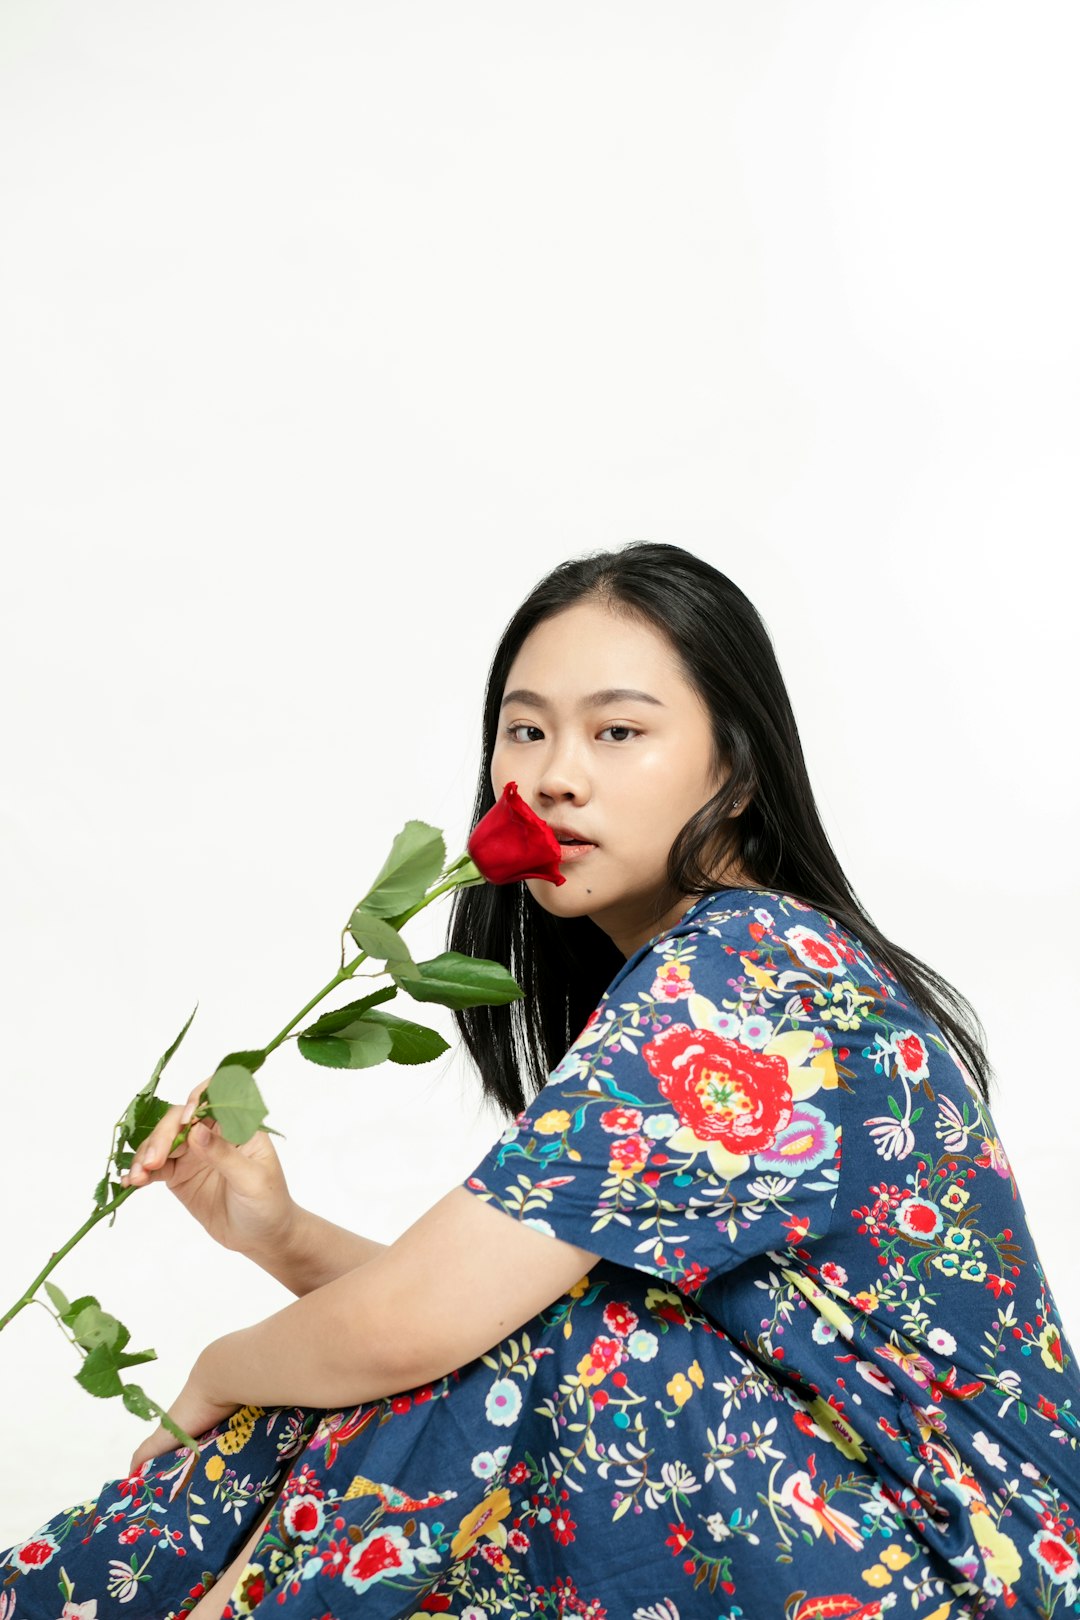 woman in blue and red floral shirt holding red rose